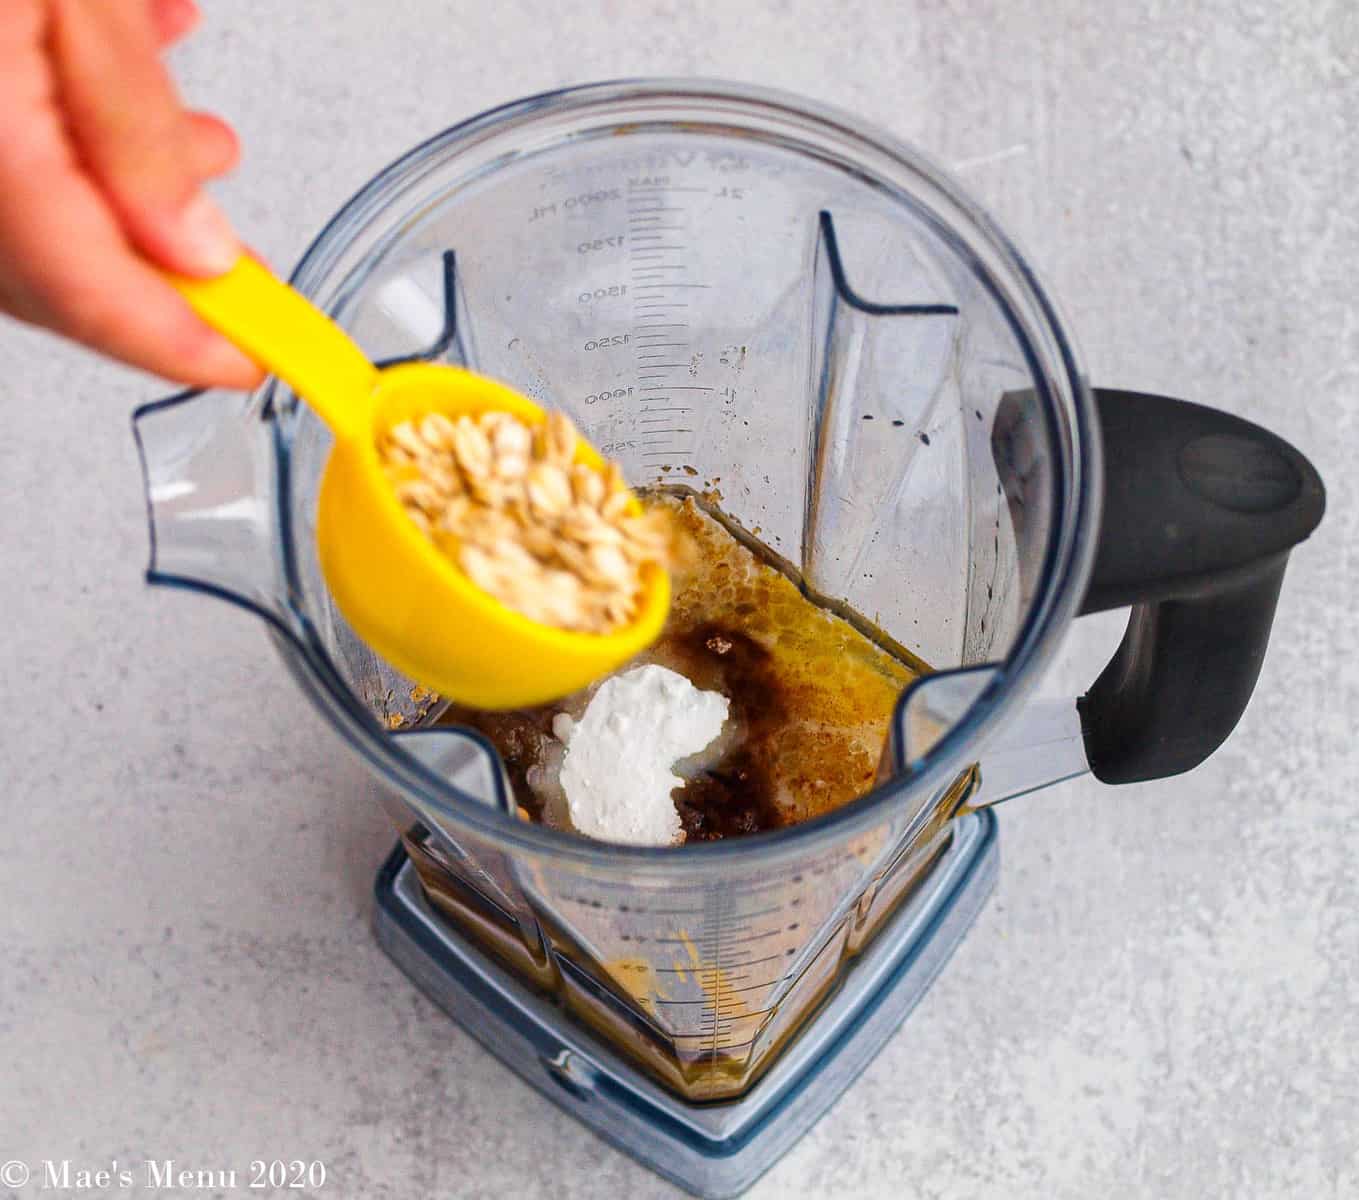 Adding oats to a blender of pumpkin, coconut oil, and other ingredients